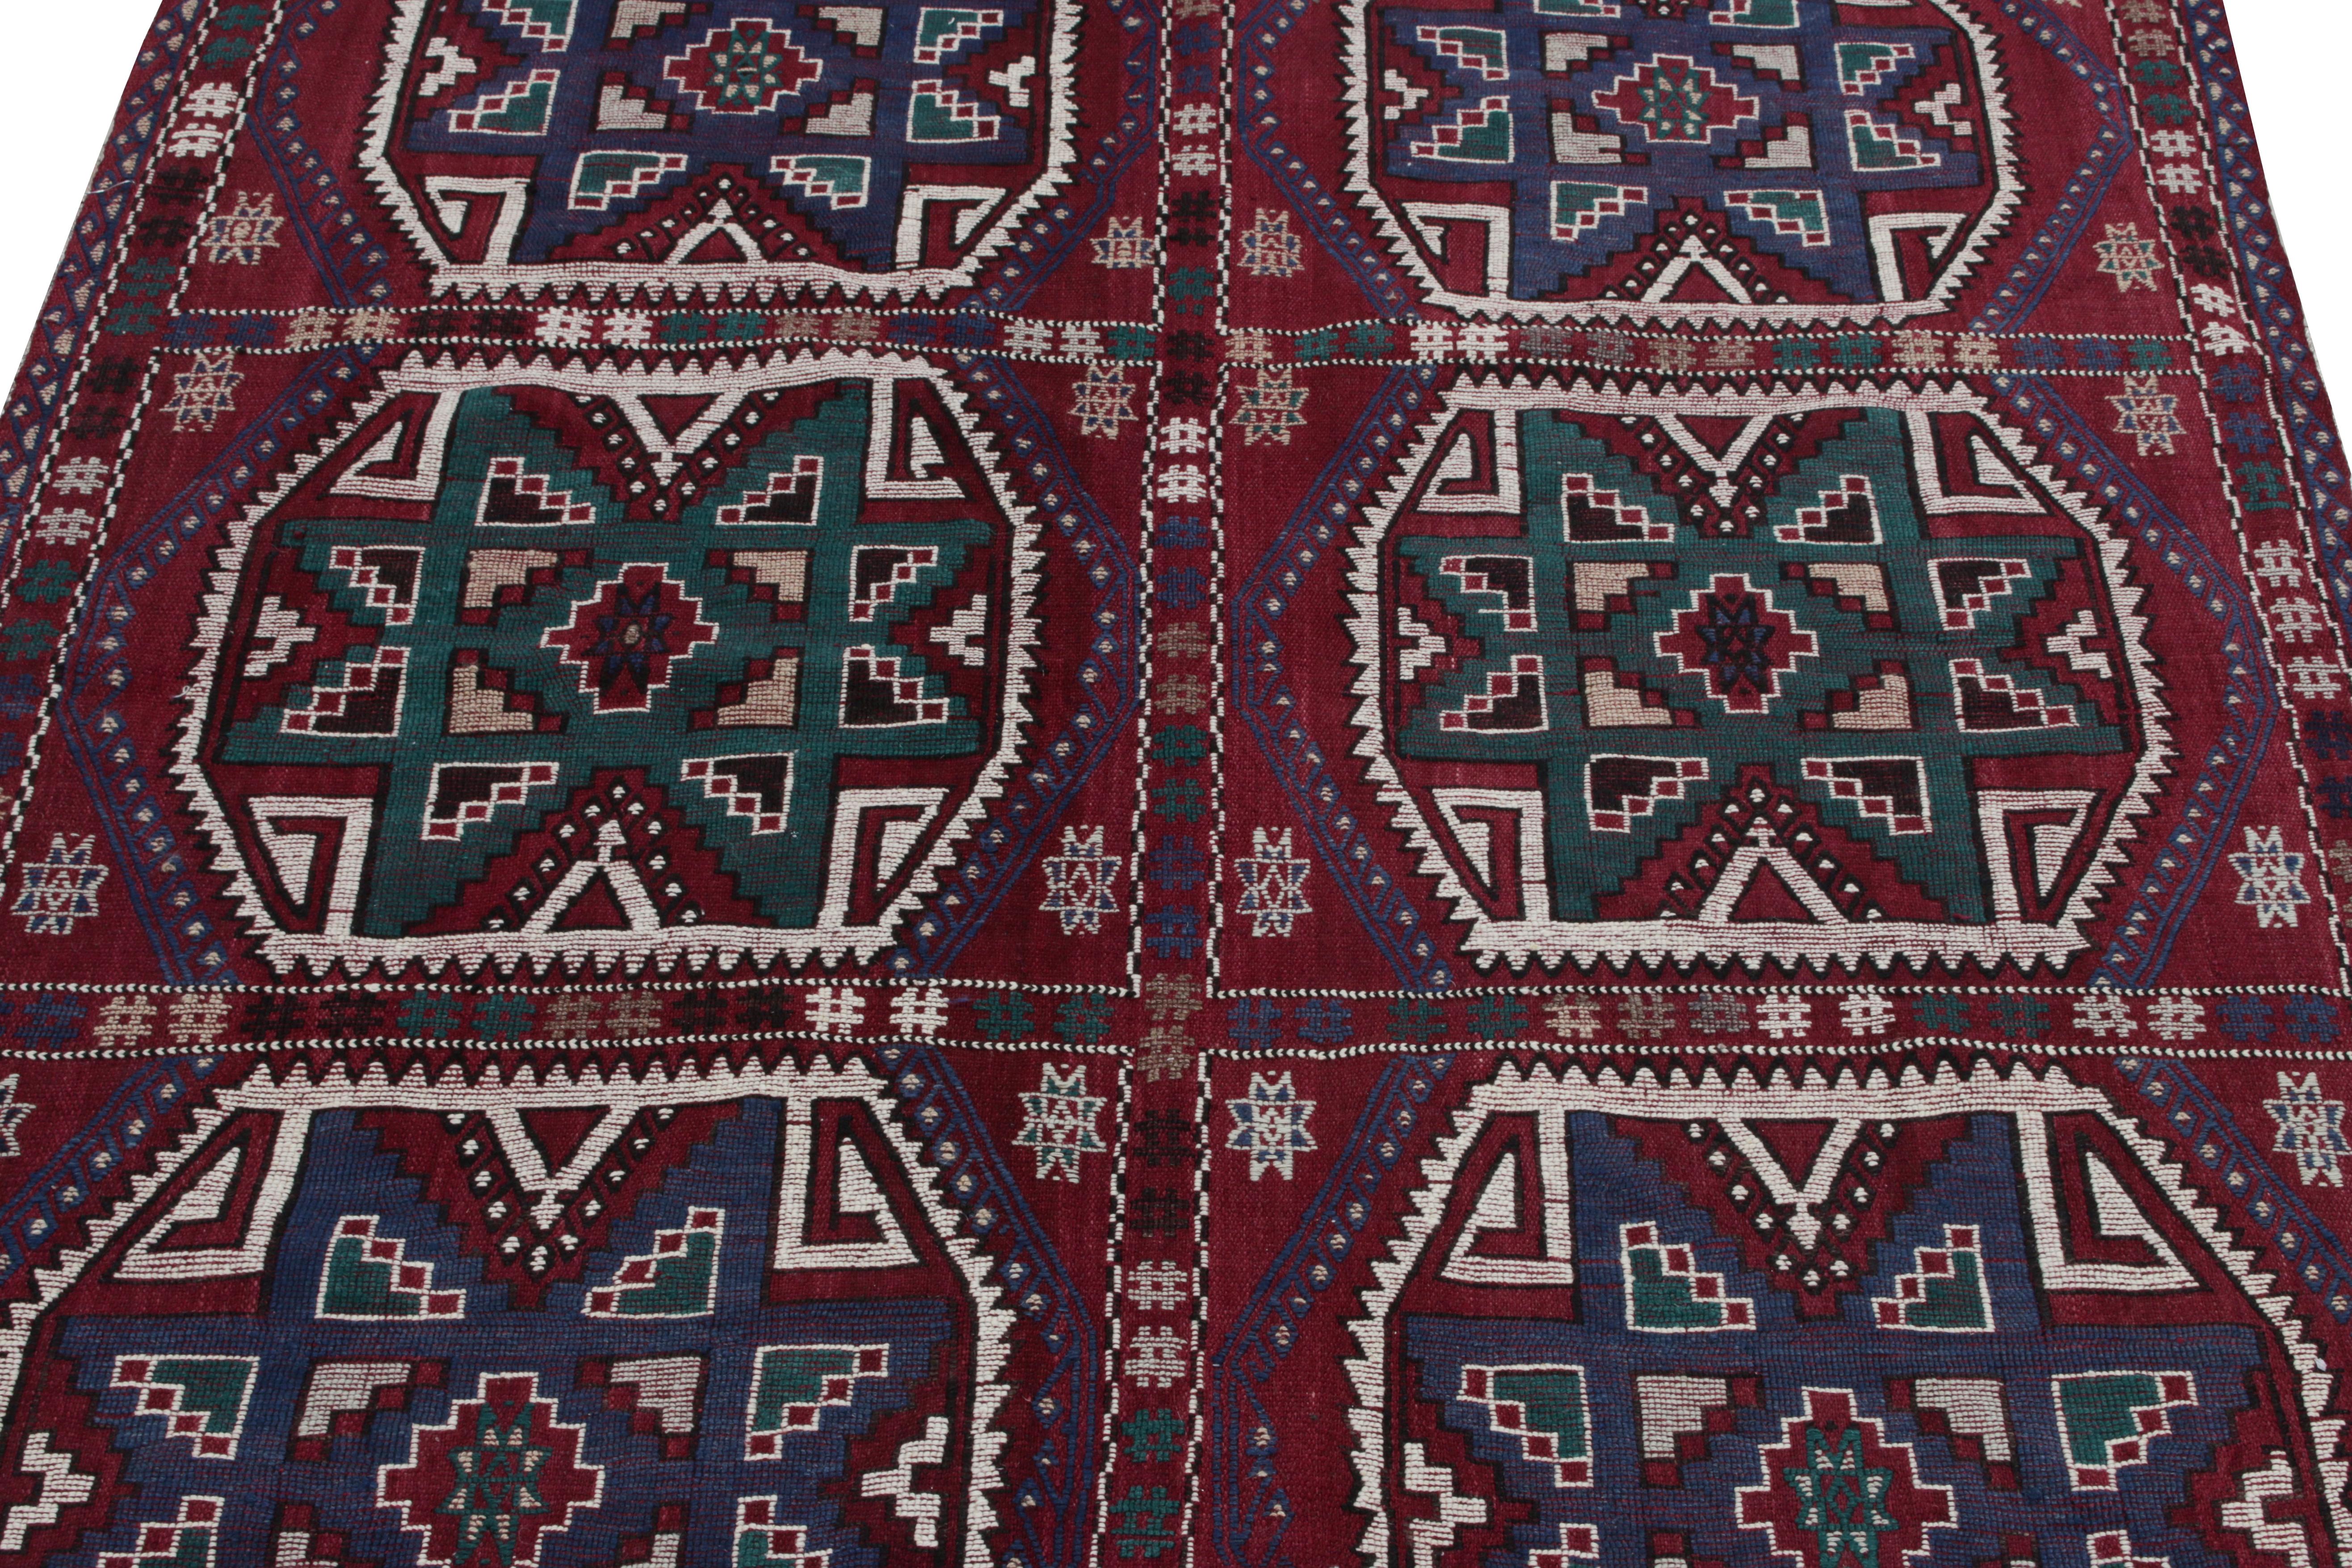 Hand-Knotted Vintage Turkish Kilim Rug in Wine, Teal & White Geometric Pattern by Rug & Kilim For Sale